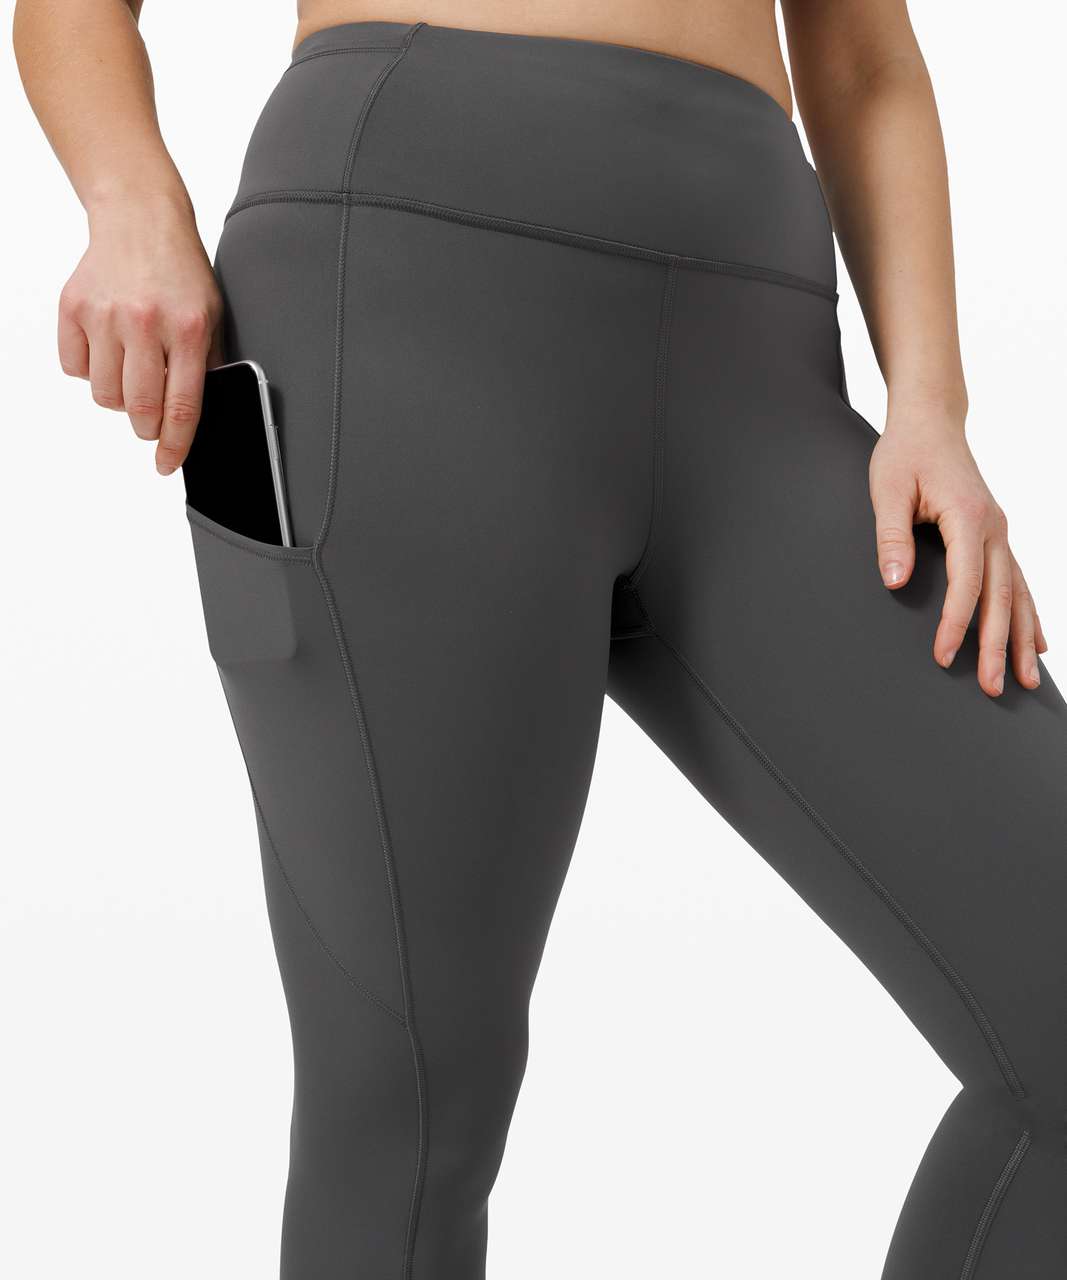 Lululemon Fast and Free Tight 28" *Non-Reflective - Graphite Grey